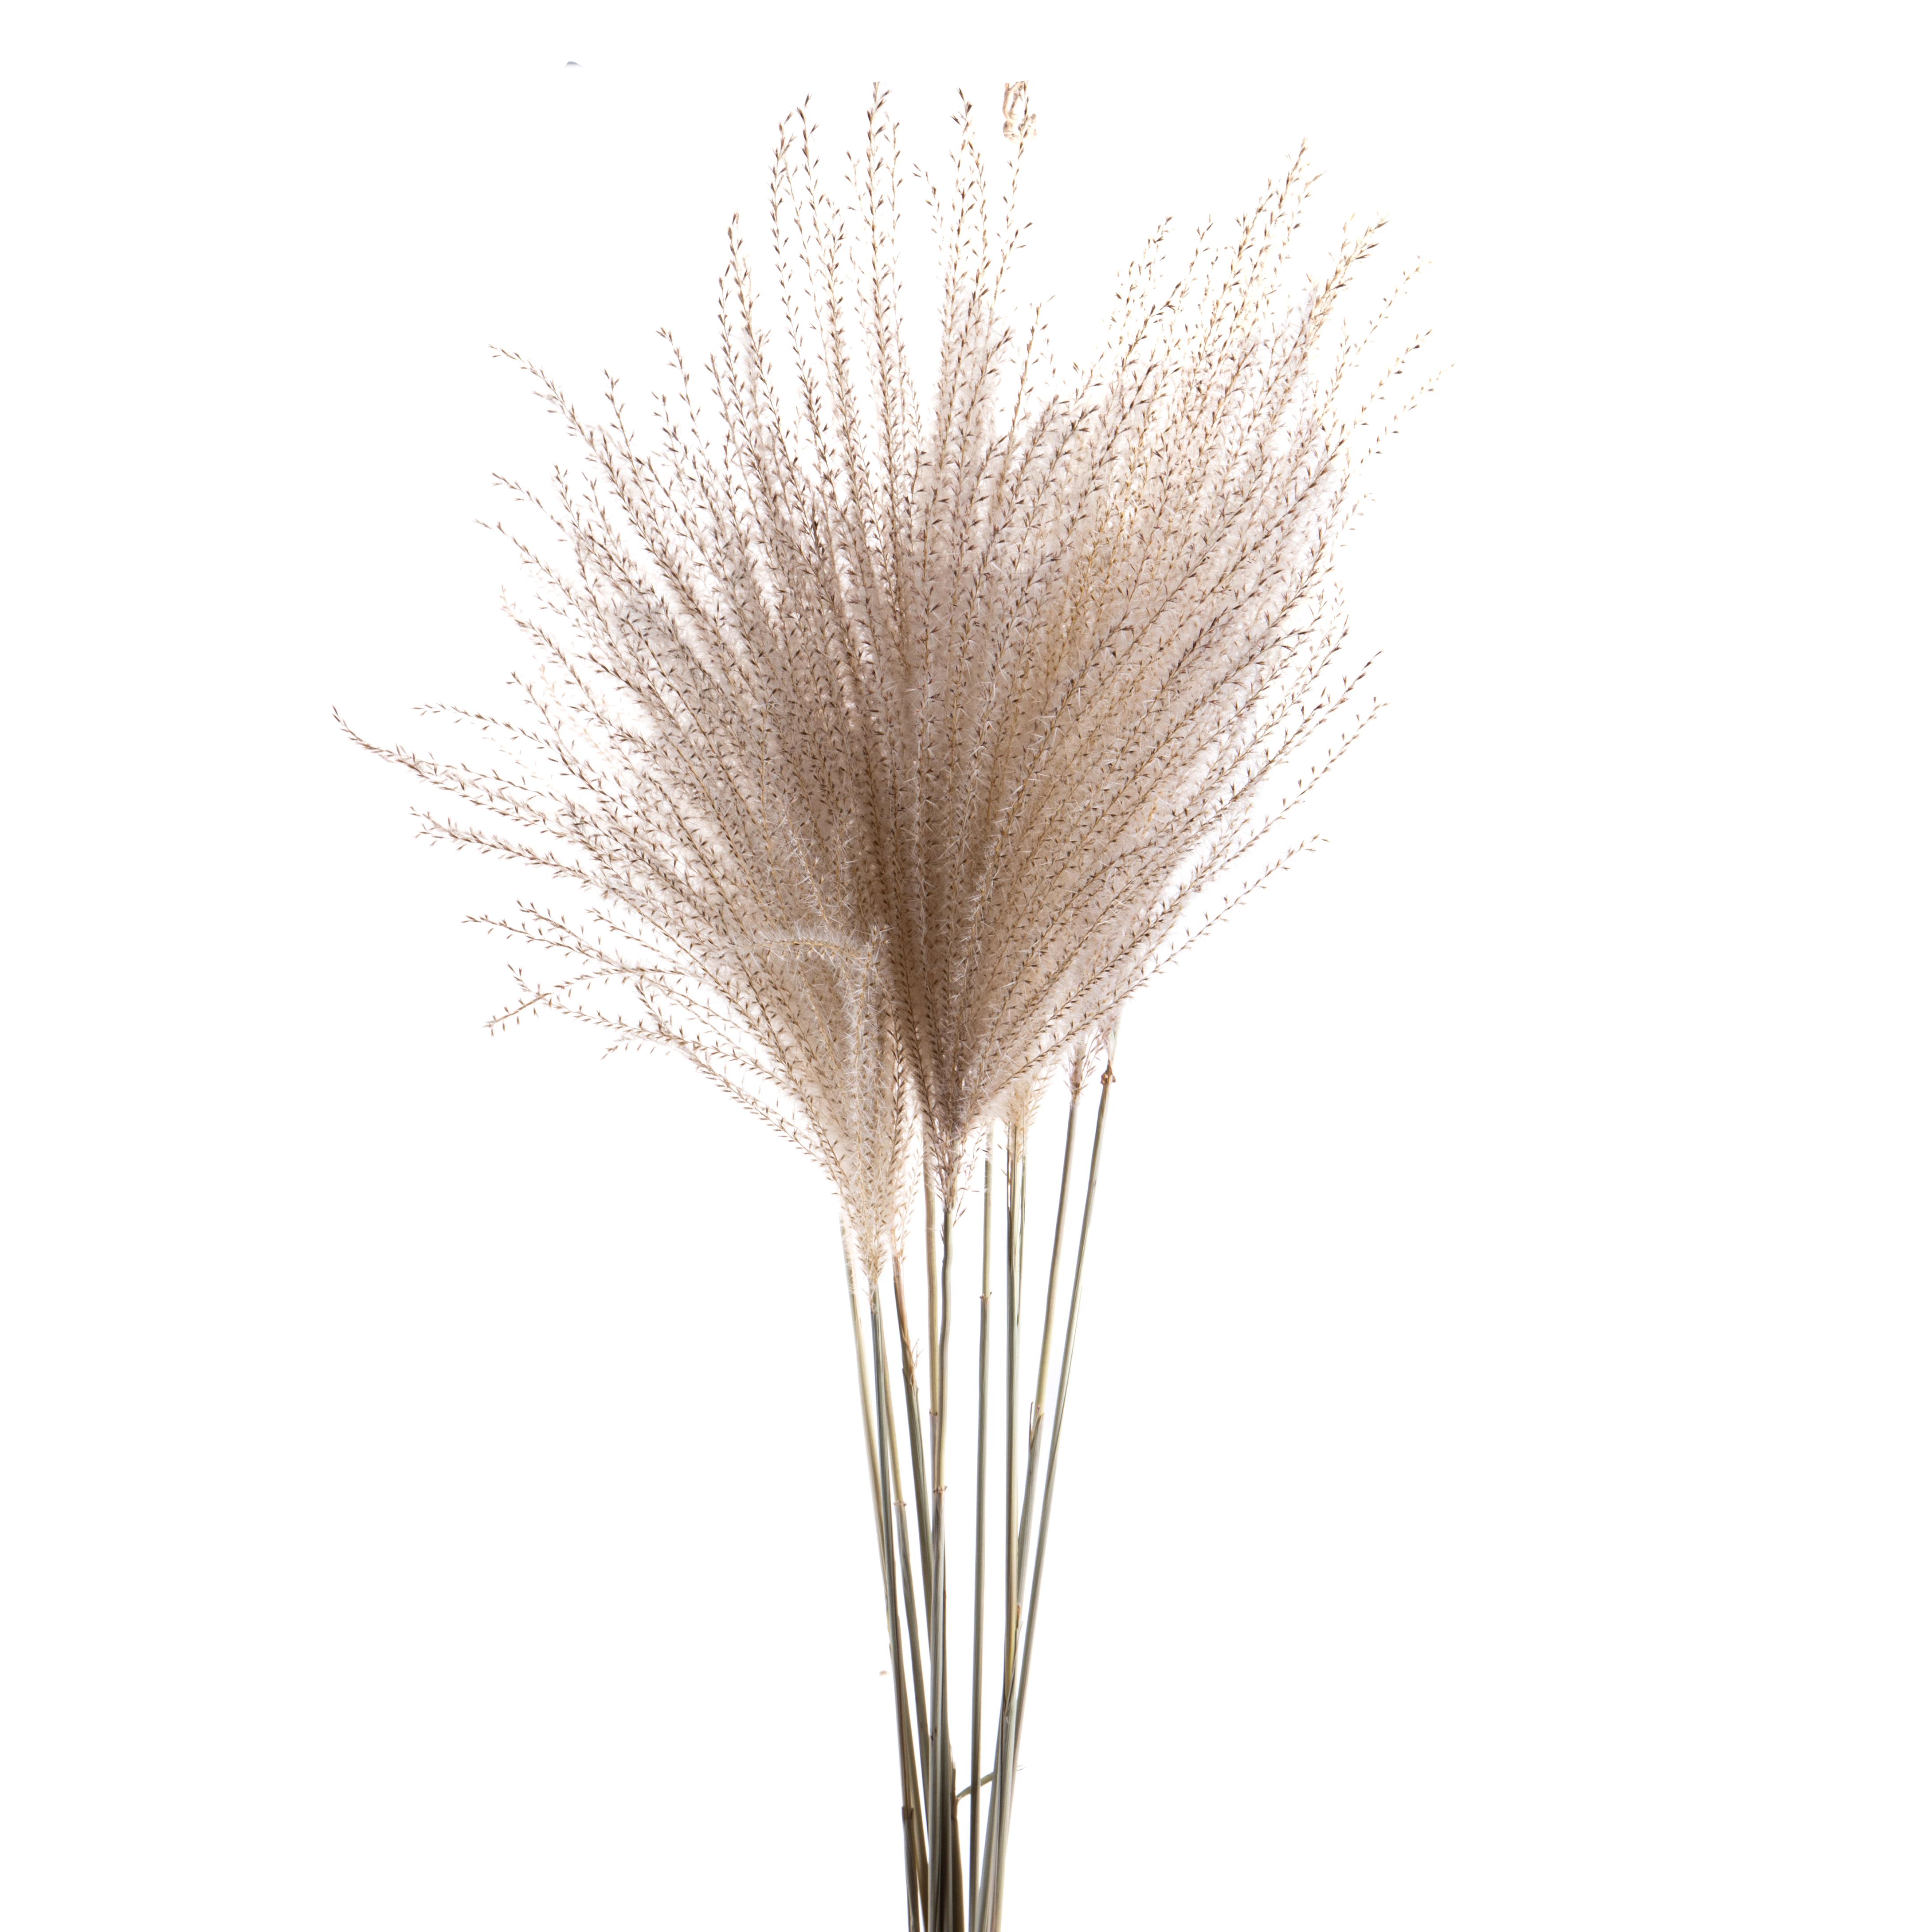 NATURAL PRODUCTS DRIED FLOWERS AND ERBS,EULALIA 1 PZ 130 CM - SACCO